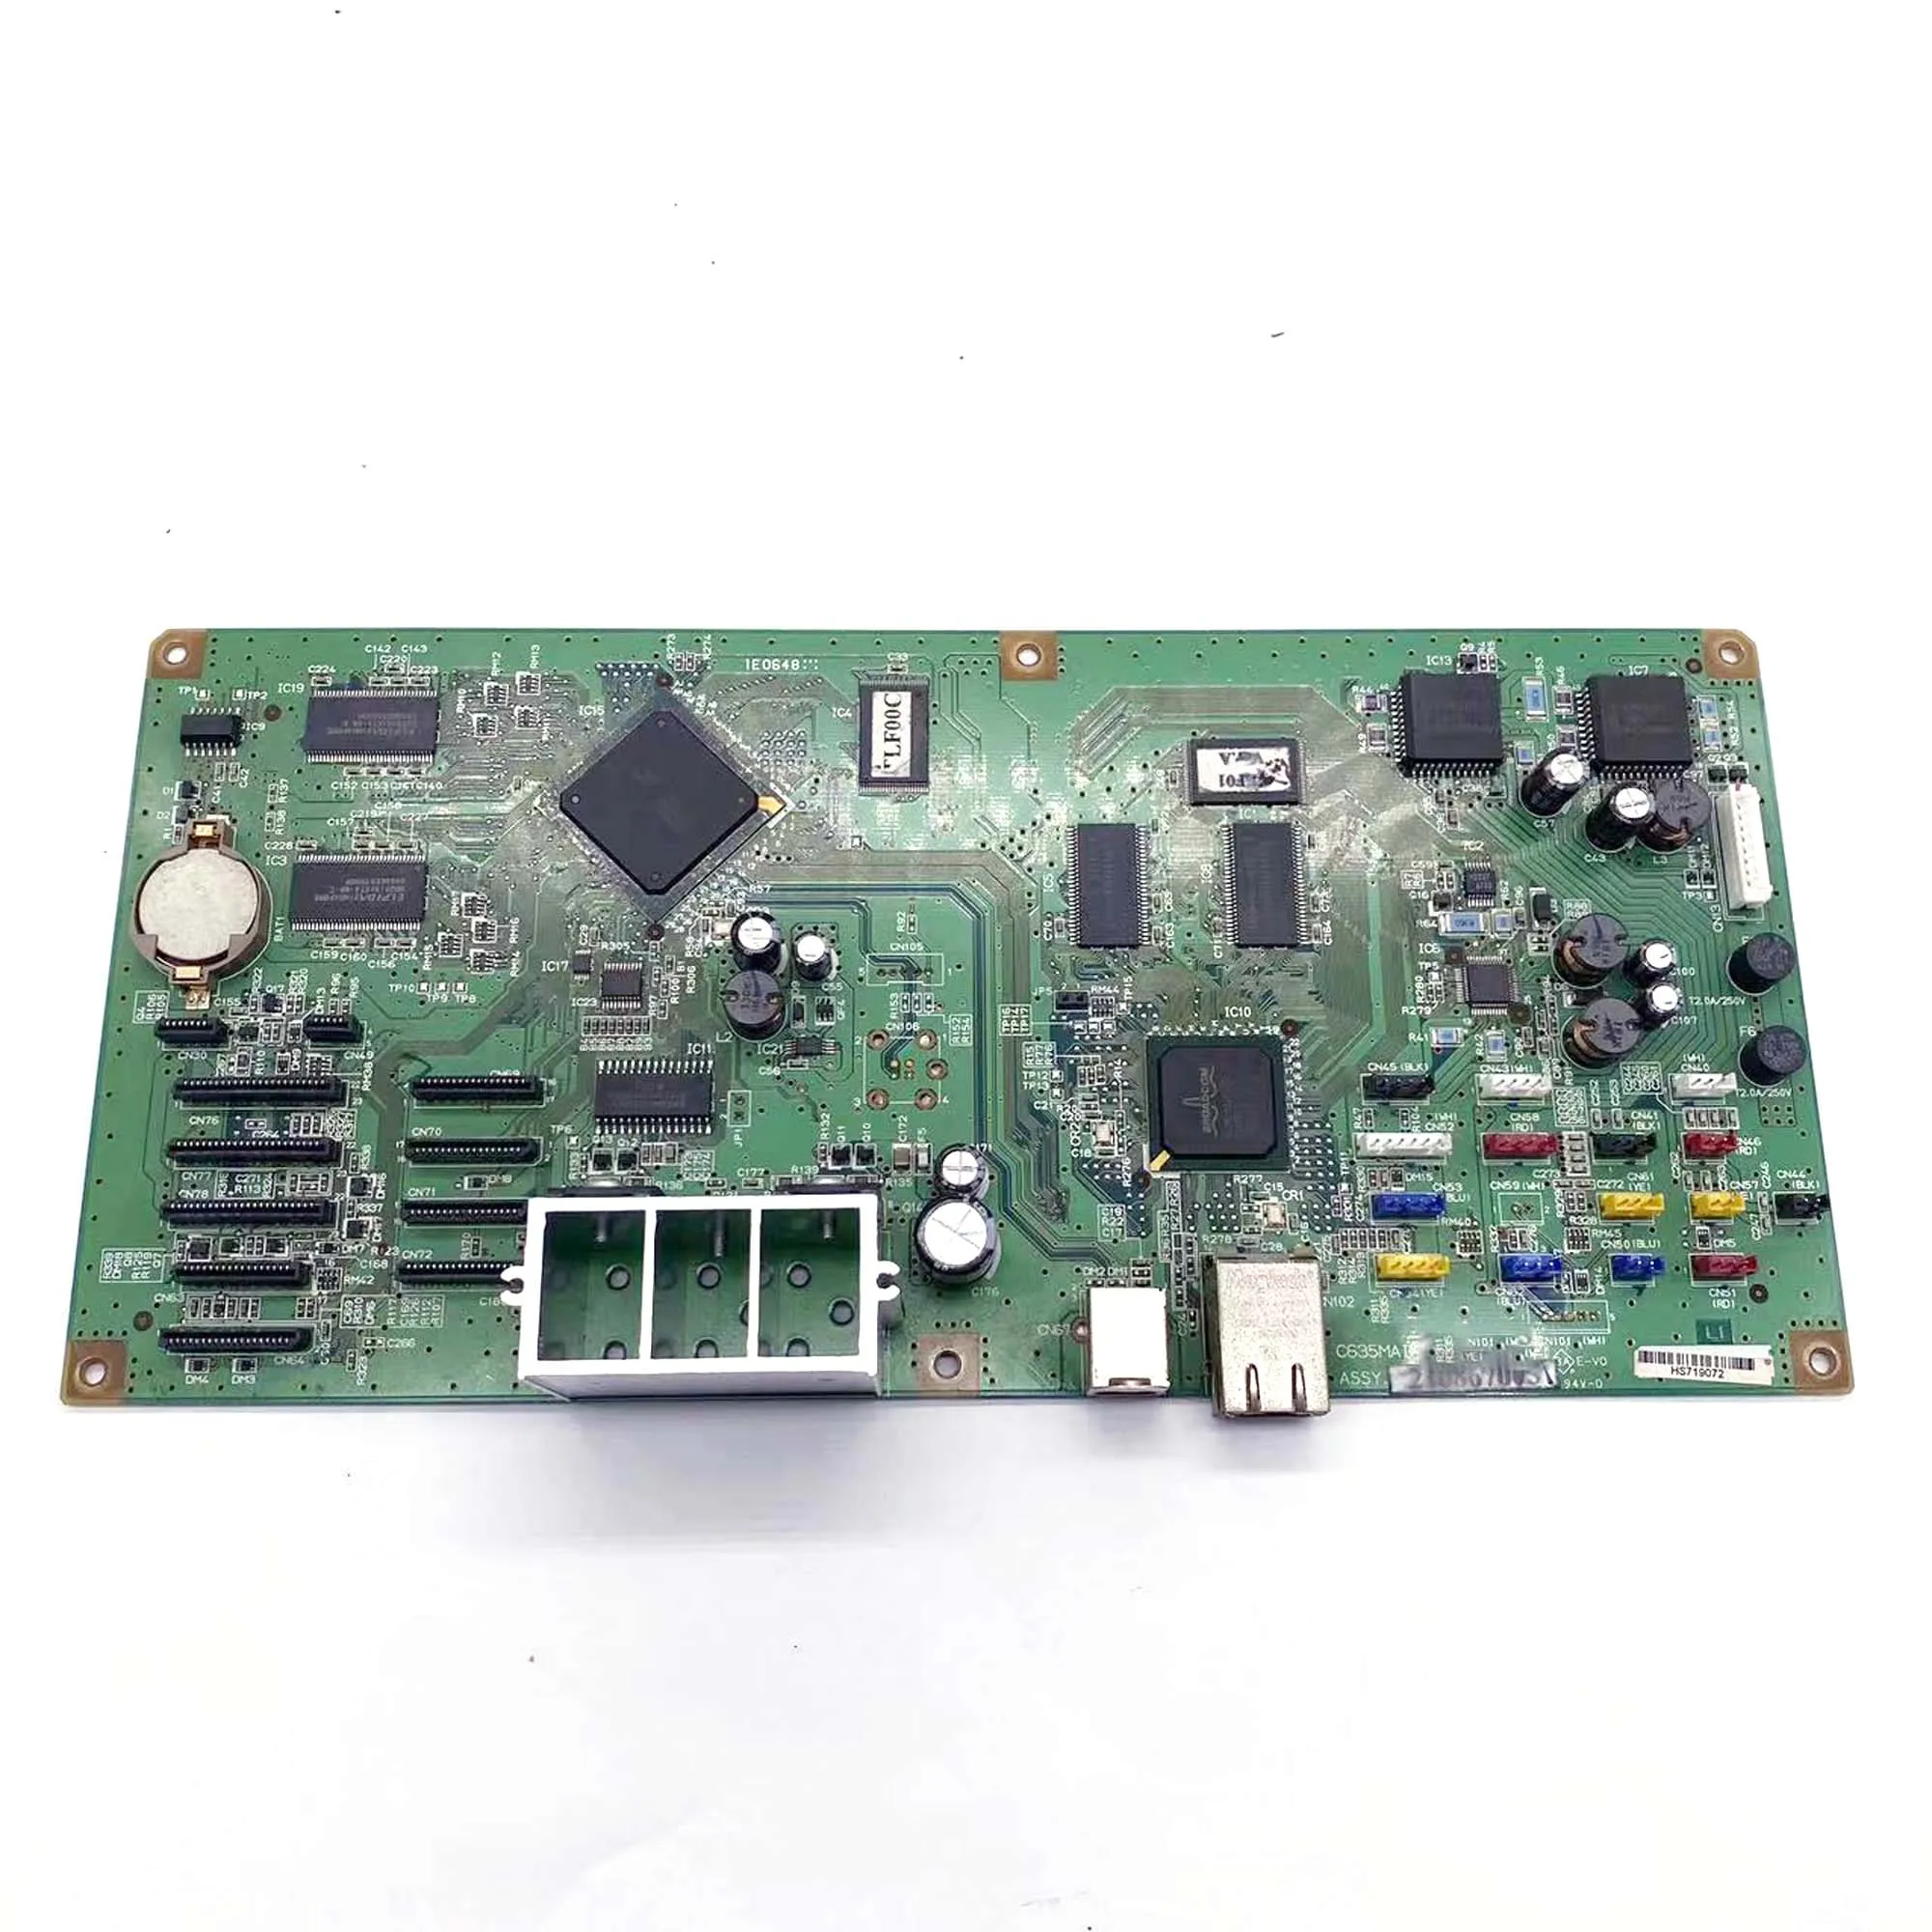 

Main Board Motherboard Fits For Epson Stylus Pro 3800C